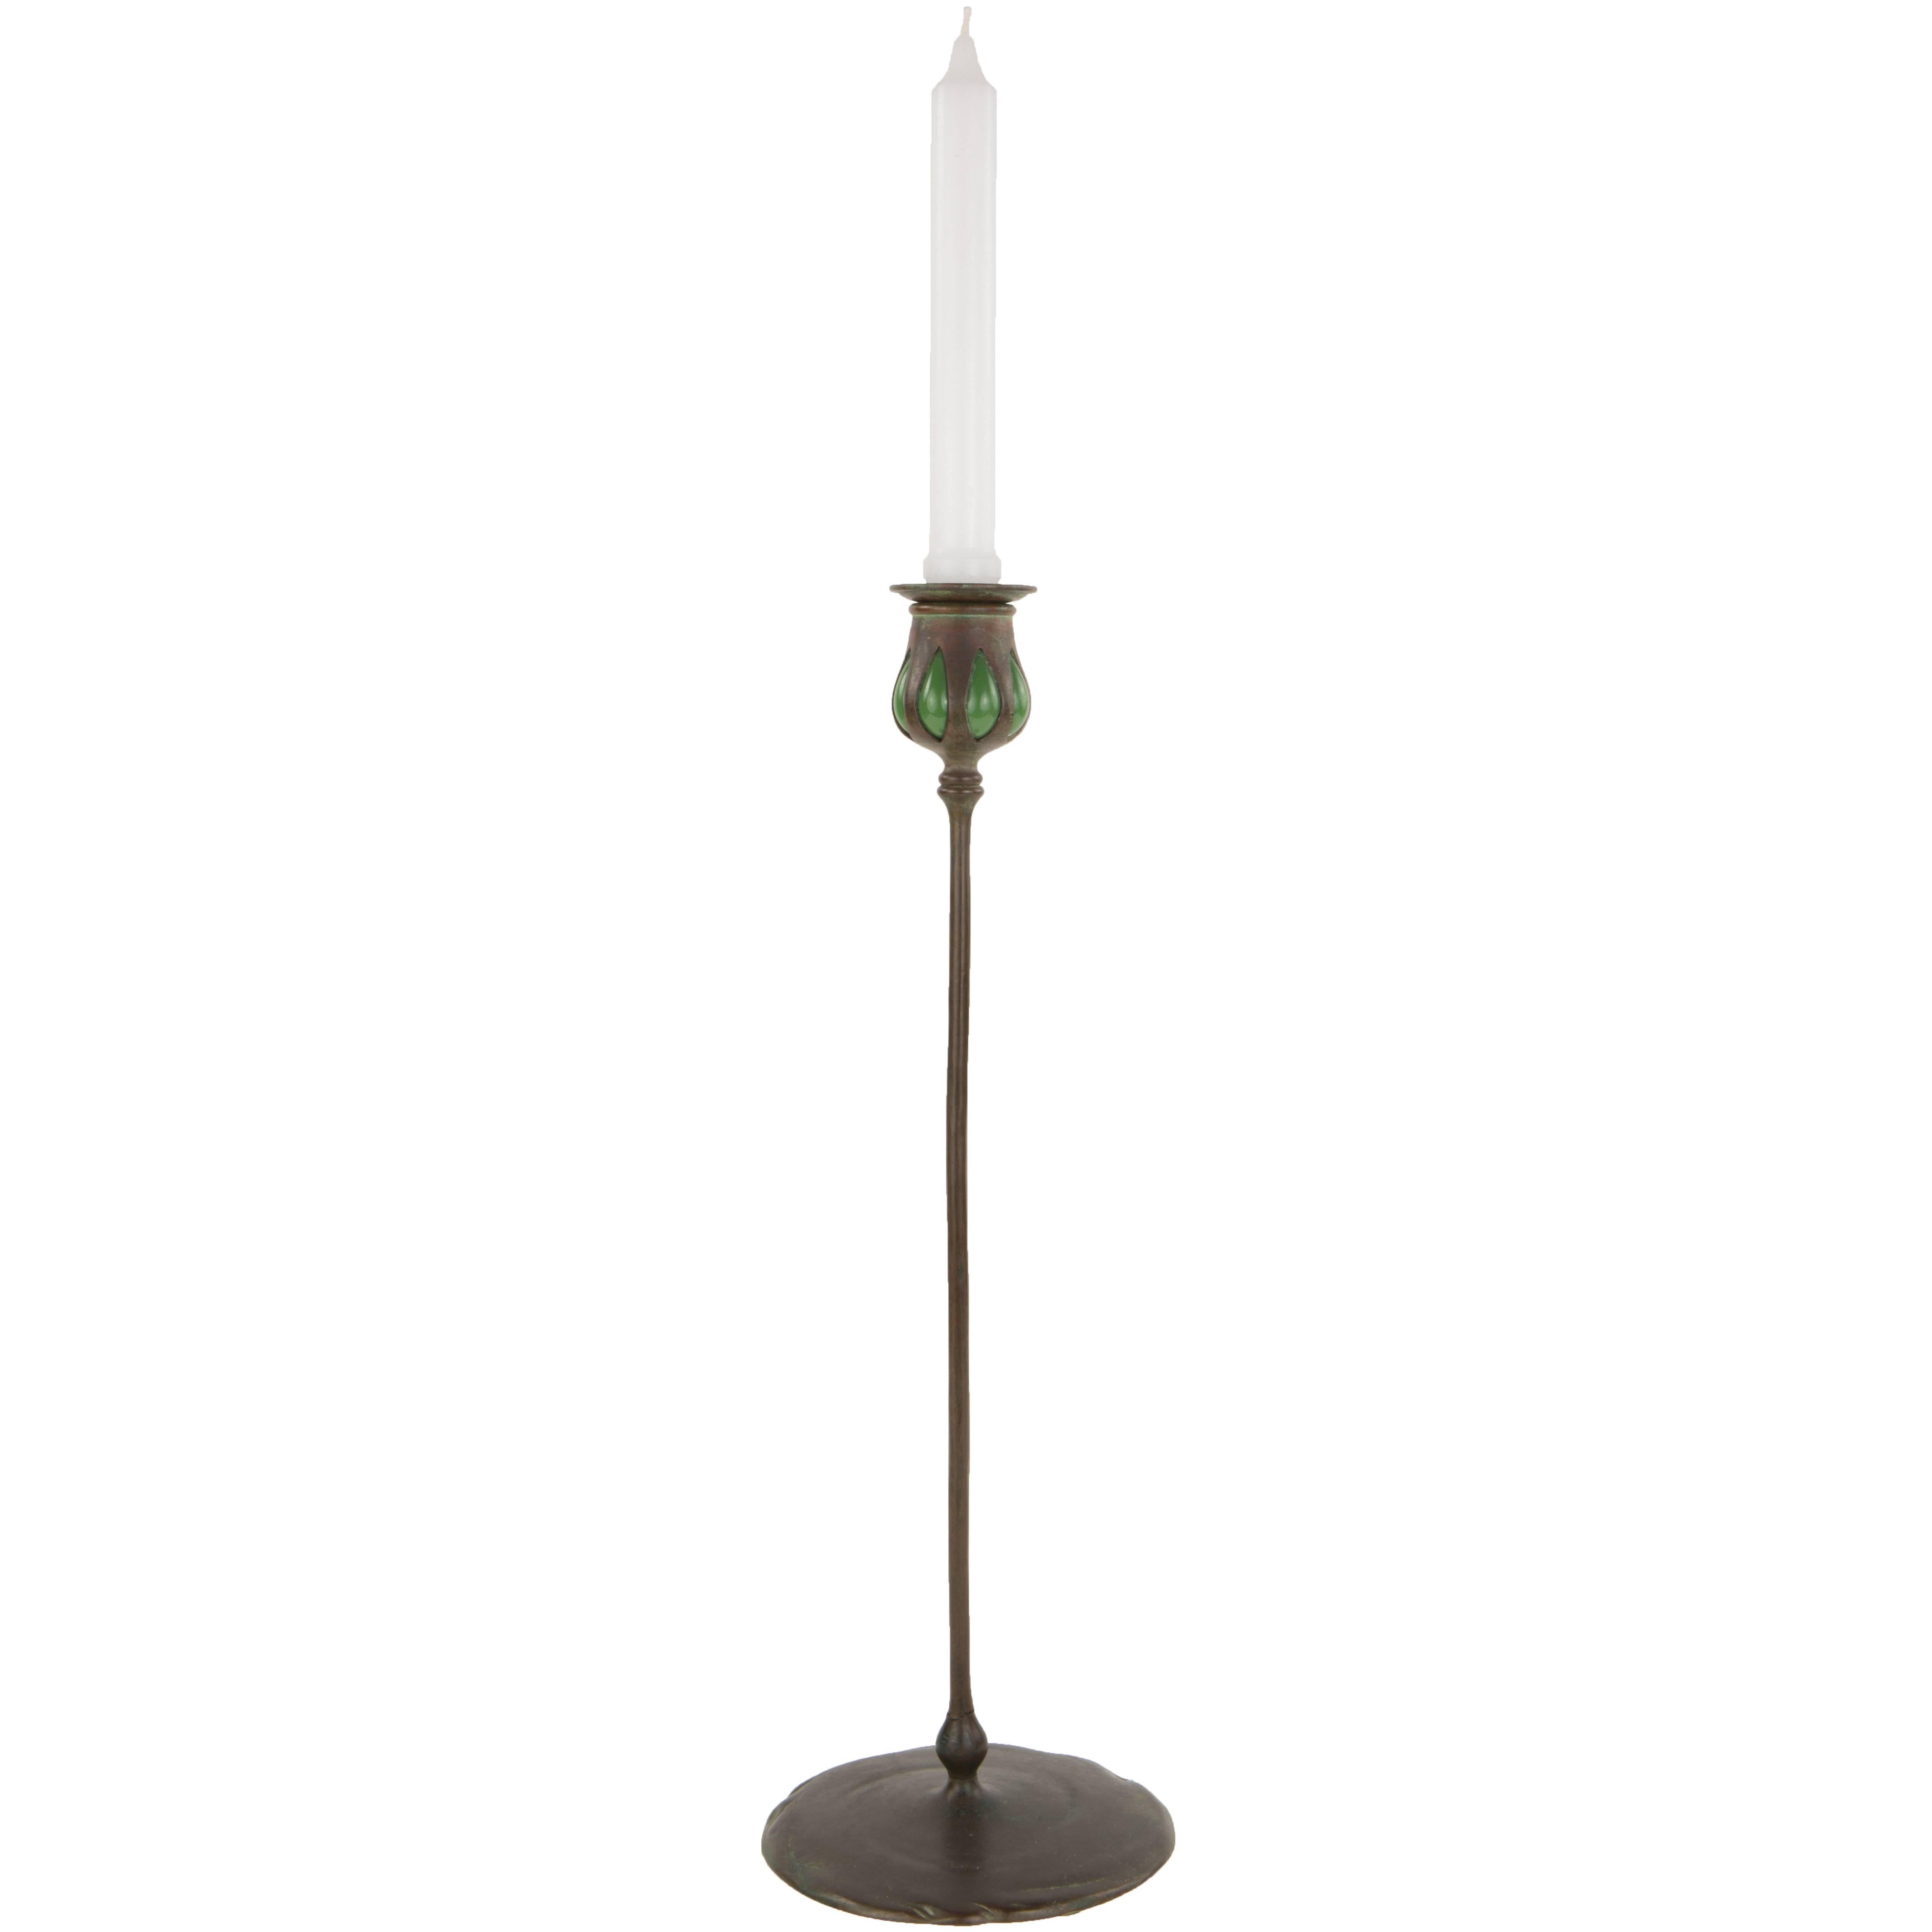 Art Nouveau Bronze and Glass "Puddle" Candlestick by, Tiffany Studios